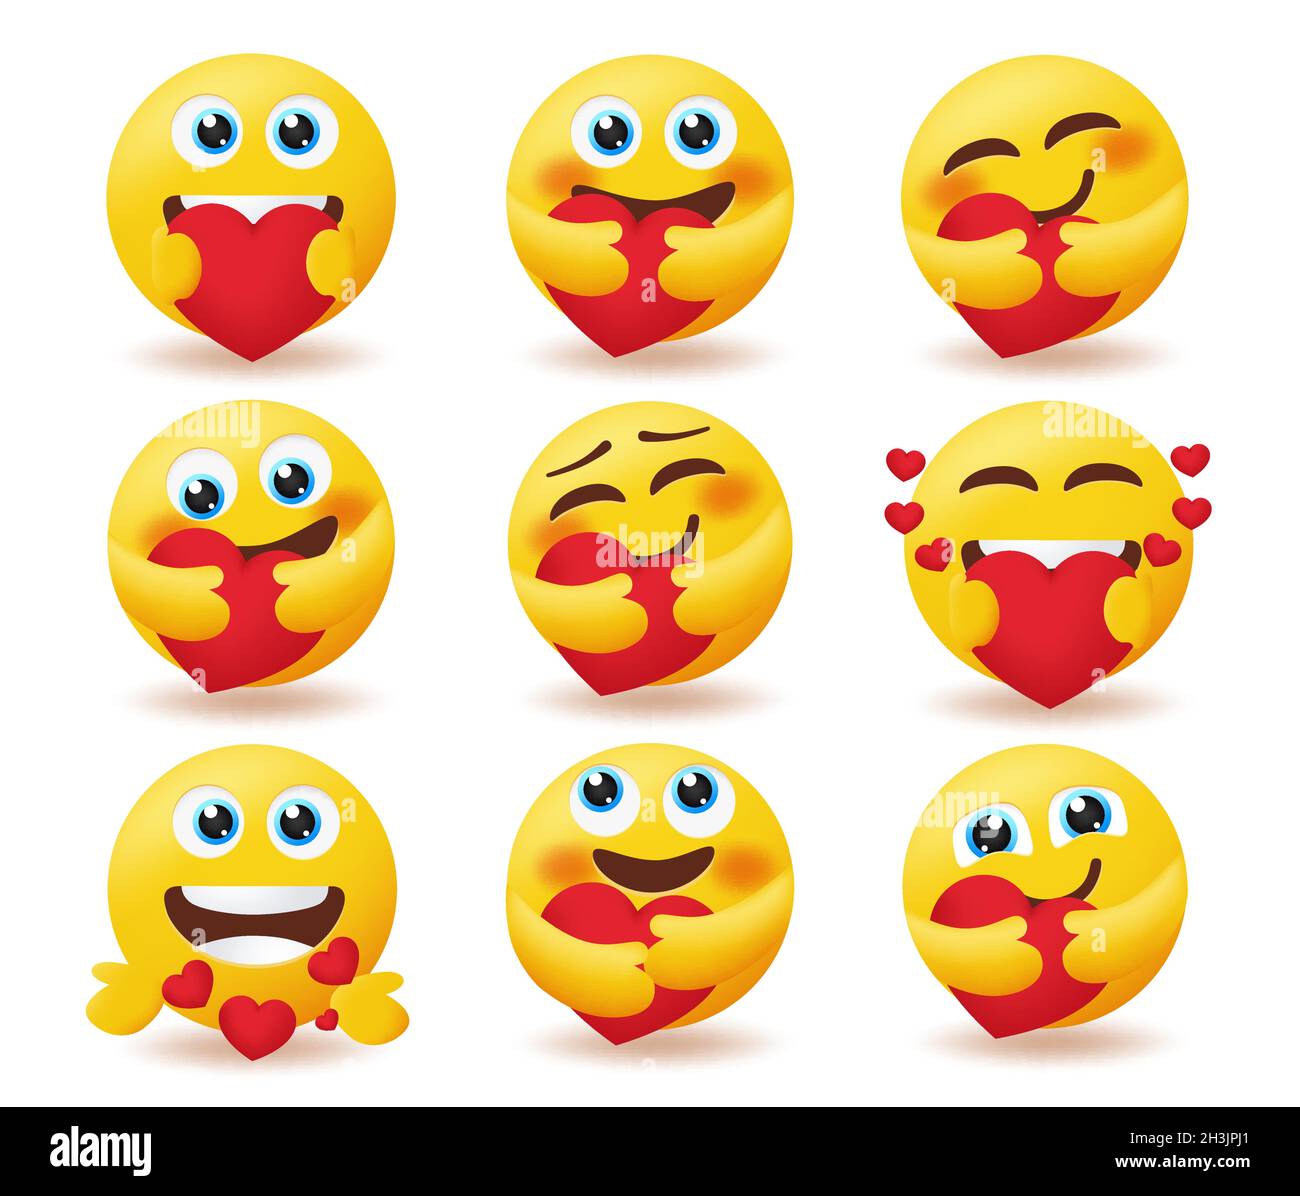 Emoji valentines emoticon vector set. Emoticons in love smiley characters in care and love pose isolated in white background for valentine smileys. Stock Vector